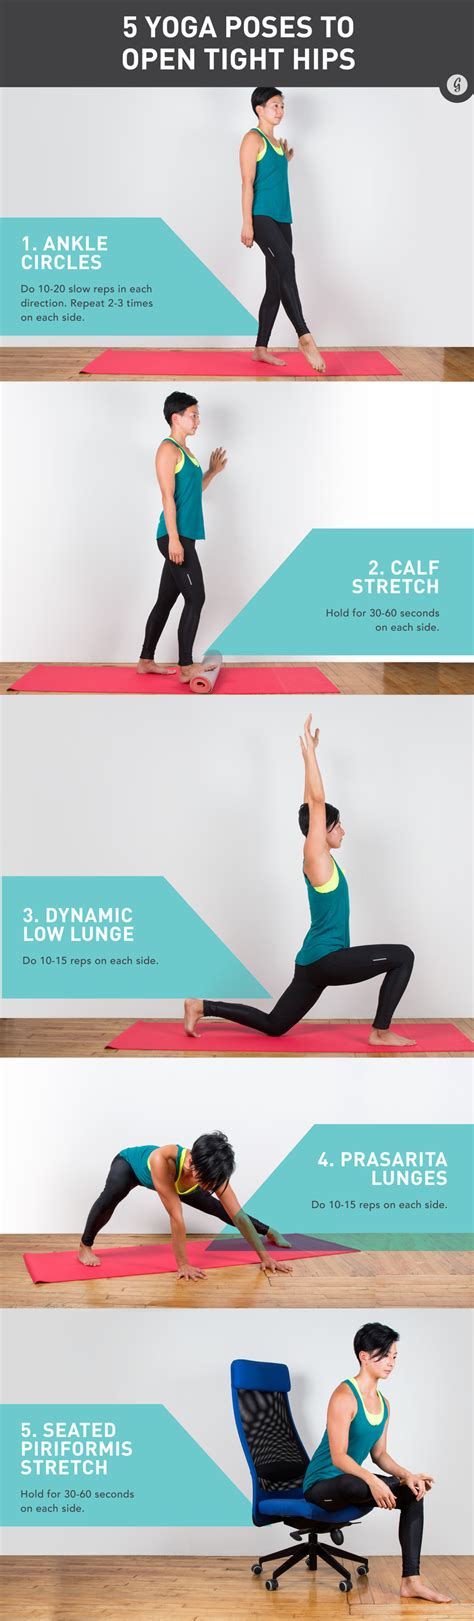 4 Hip Flexor Stretches To Relieve Tight Hips 5 Easy Yoga Moves To Open